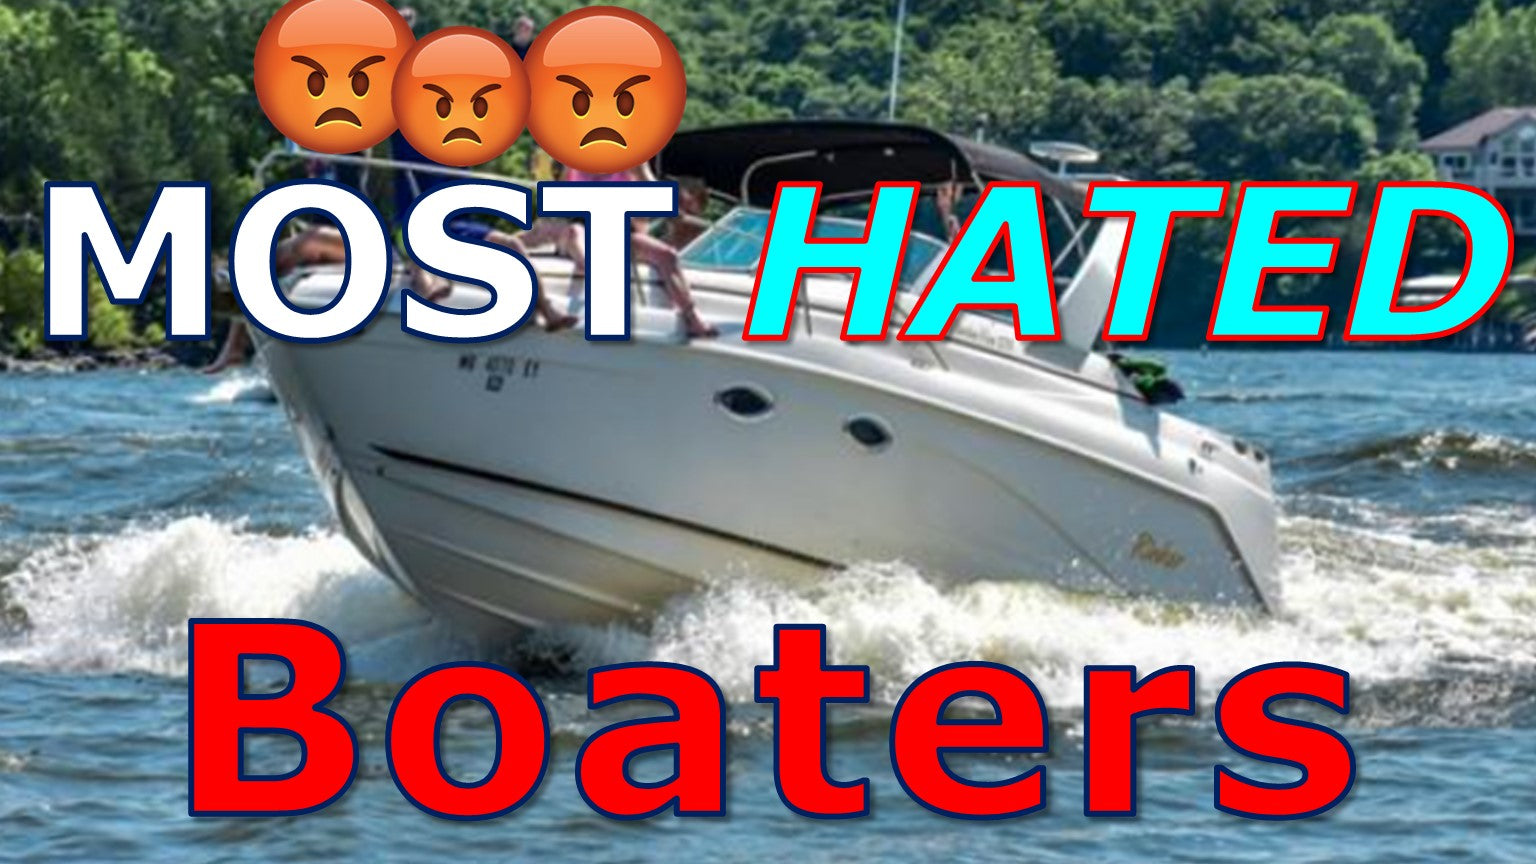 The Most Hated Boaters on the Water